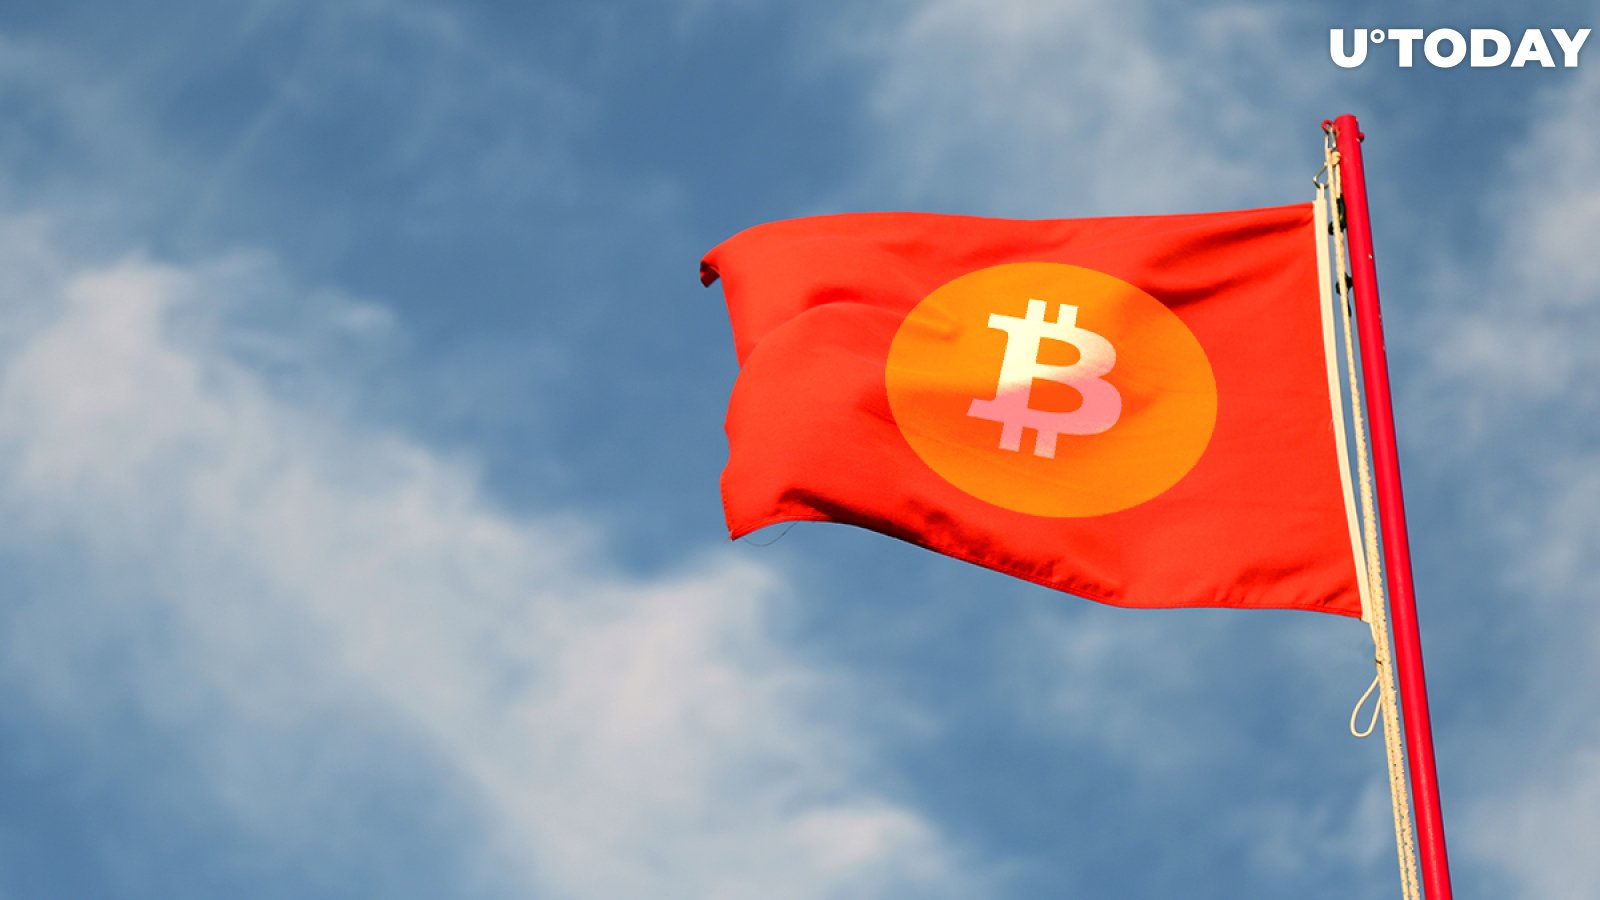 Bitcoin Price Drop to $8,600 Would “Signify” Red Flag: Analyst